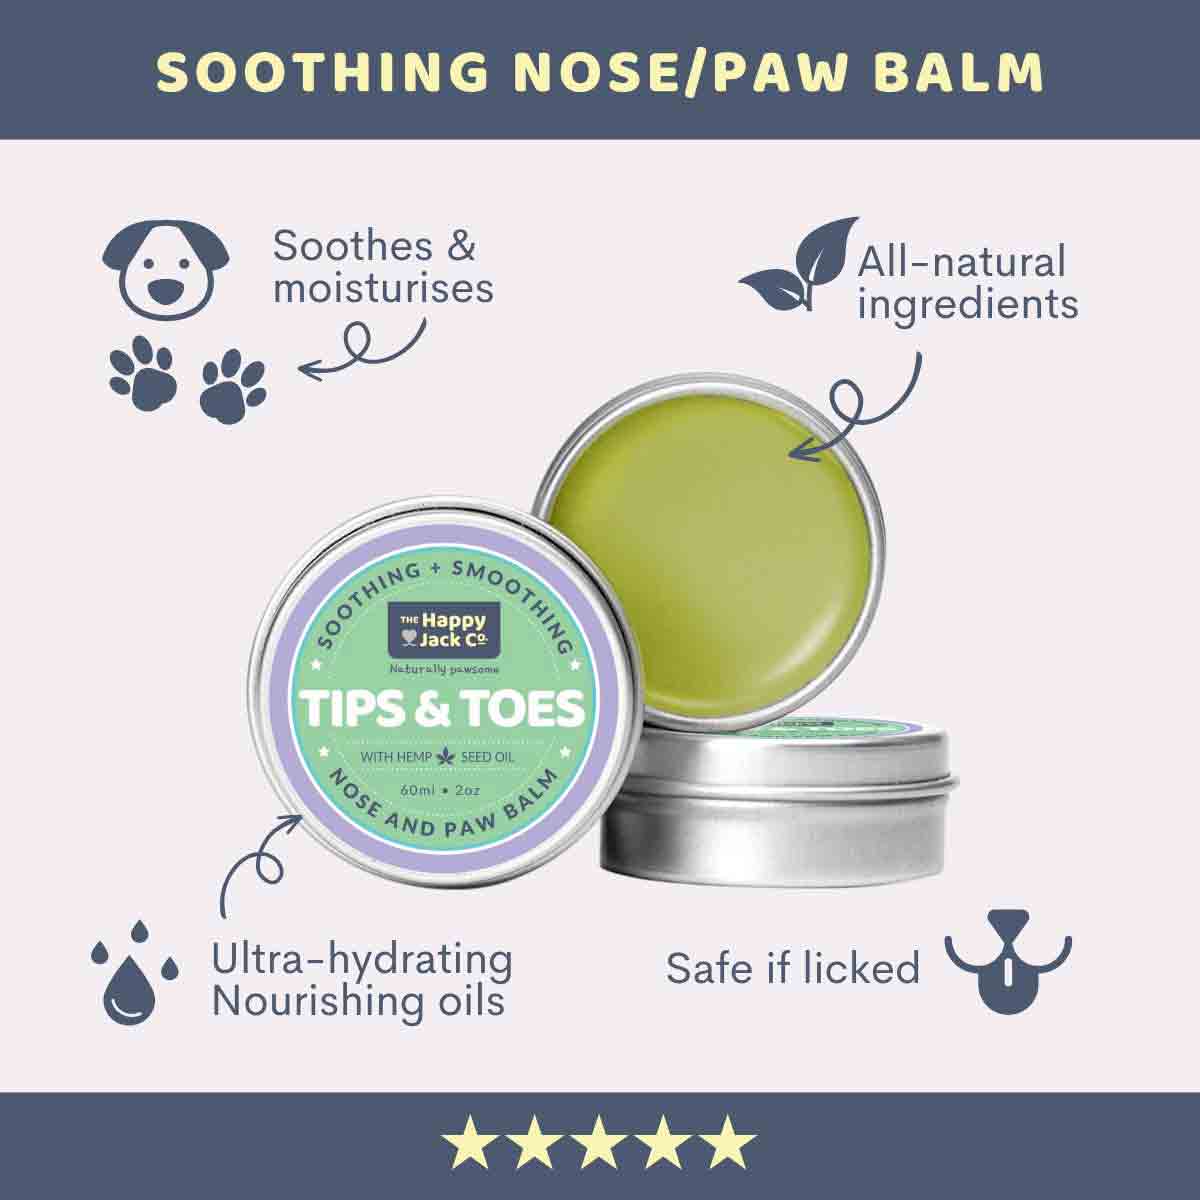 Soothe the paws - SAVE $9 - The Happy Jack Co